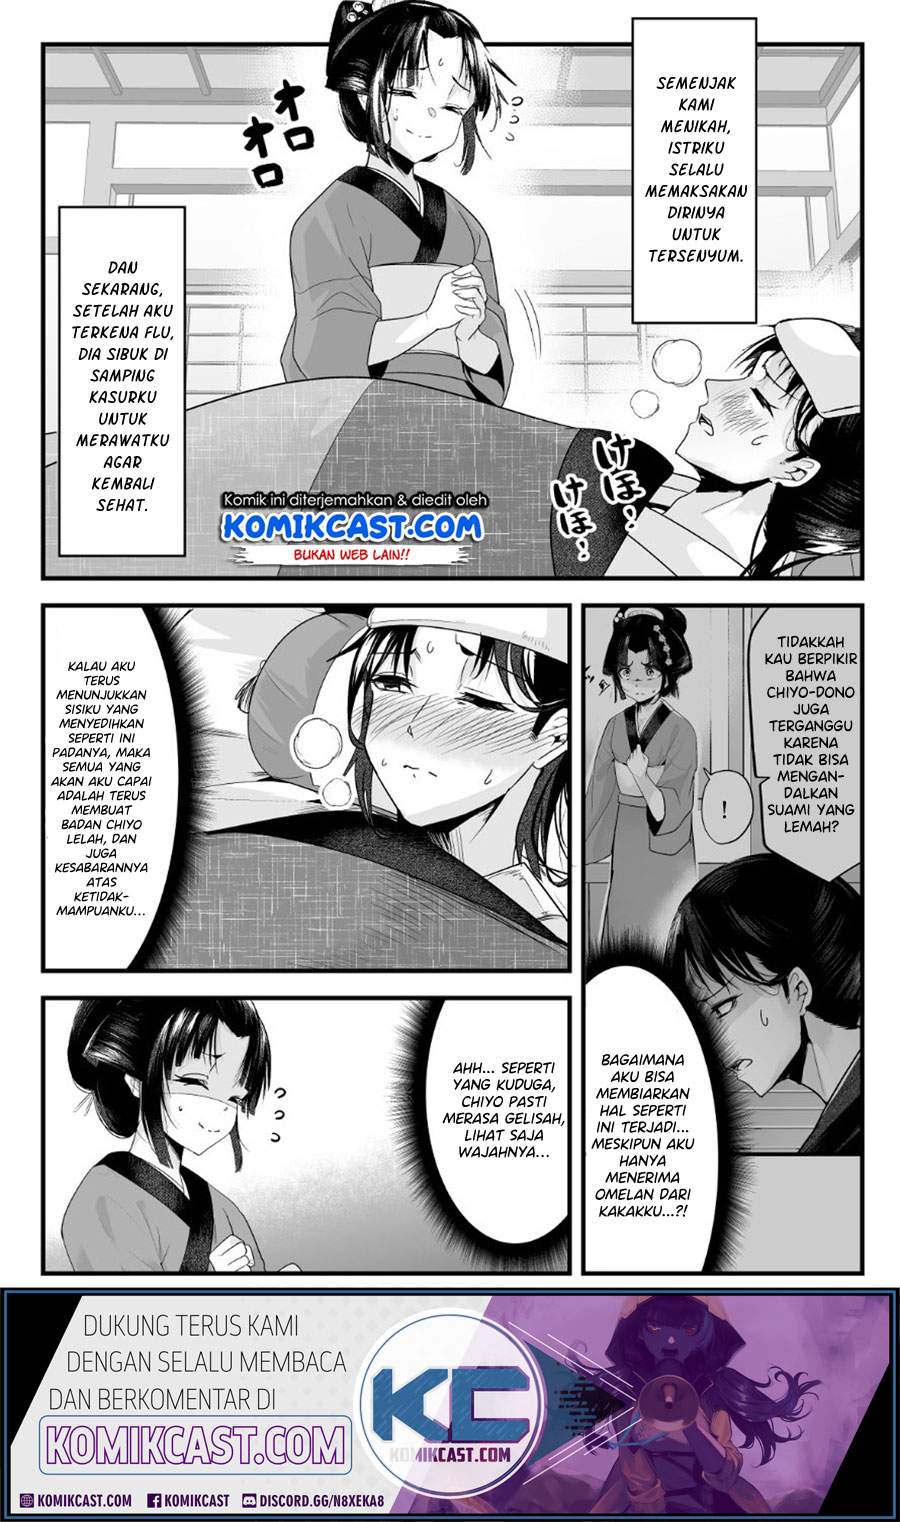 My New Wife Is Forcing Herself to Smile Chapter 14 Bahasa Indonesia